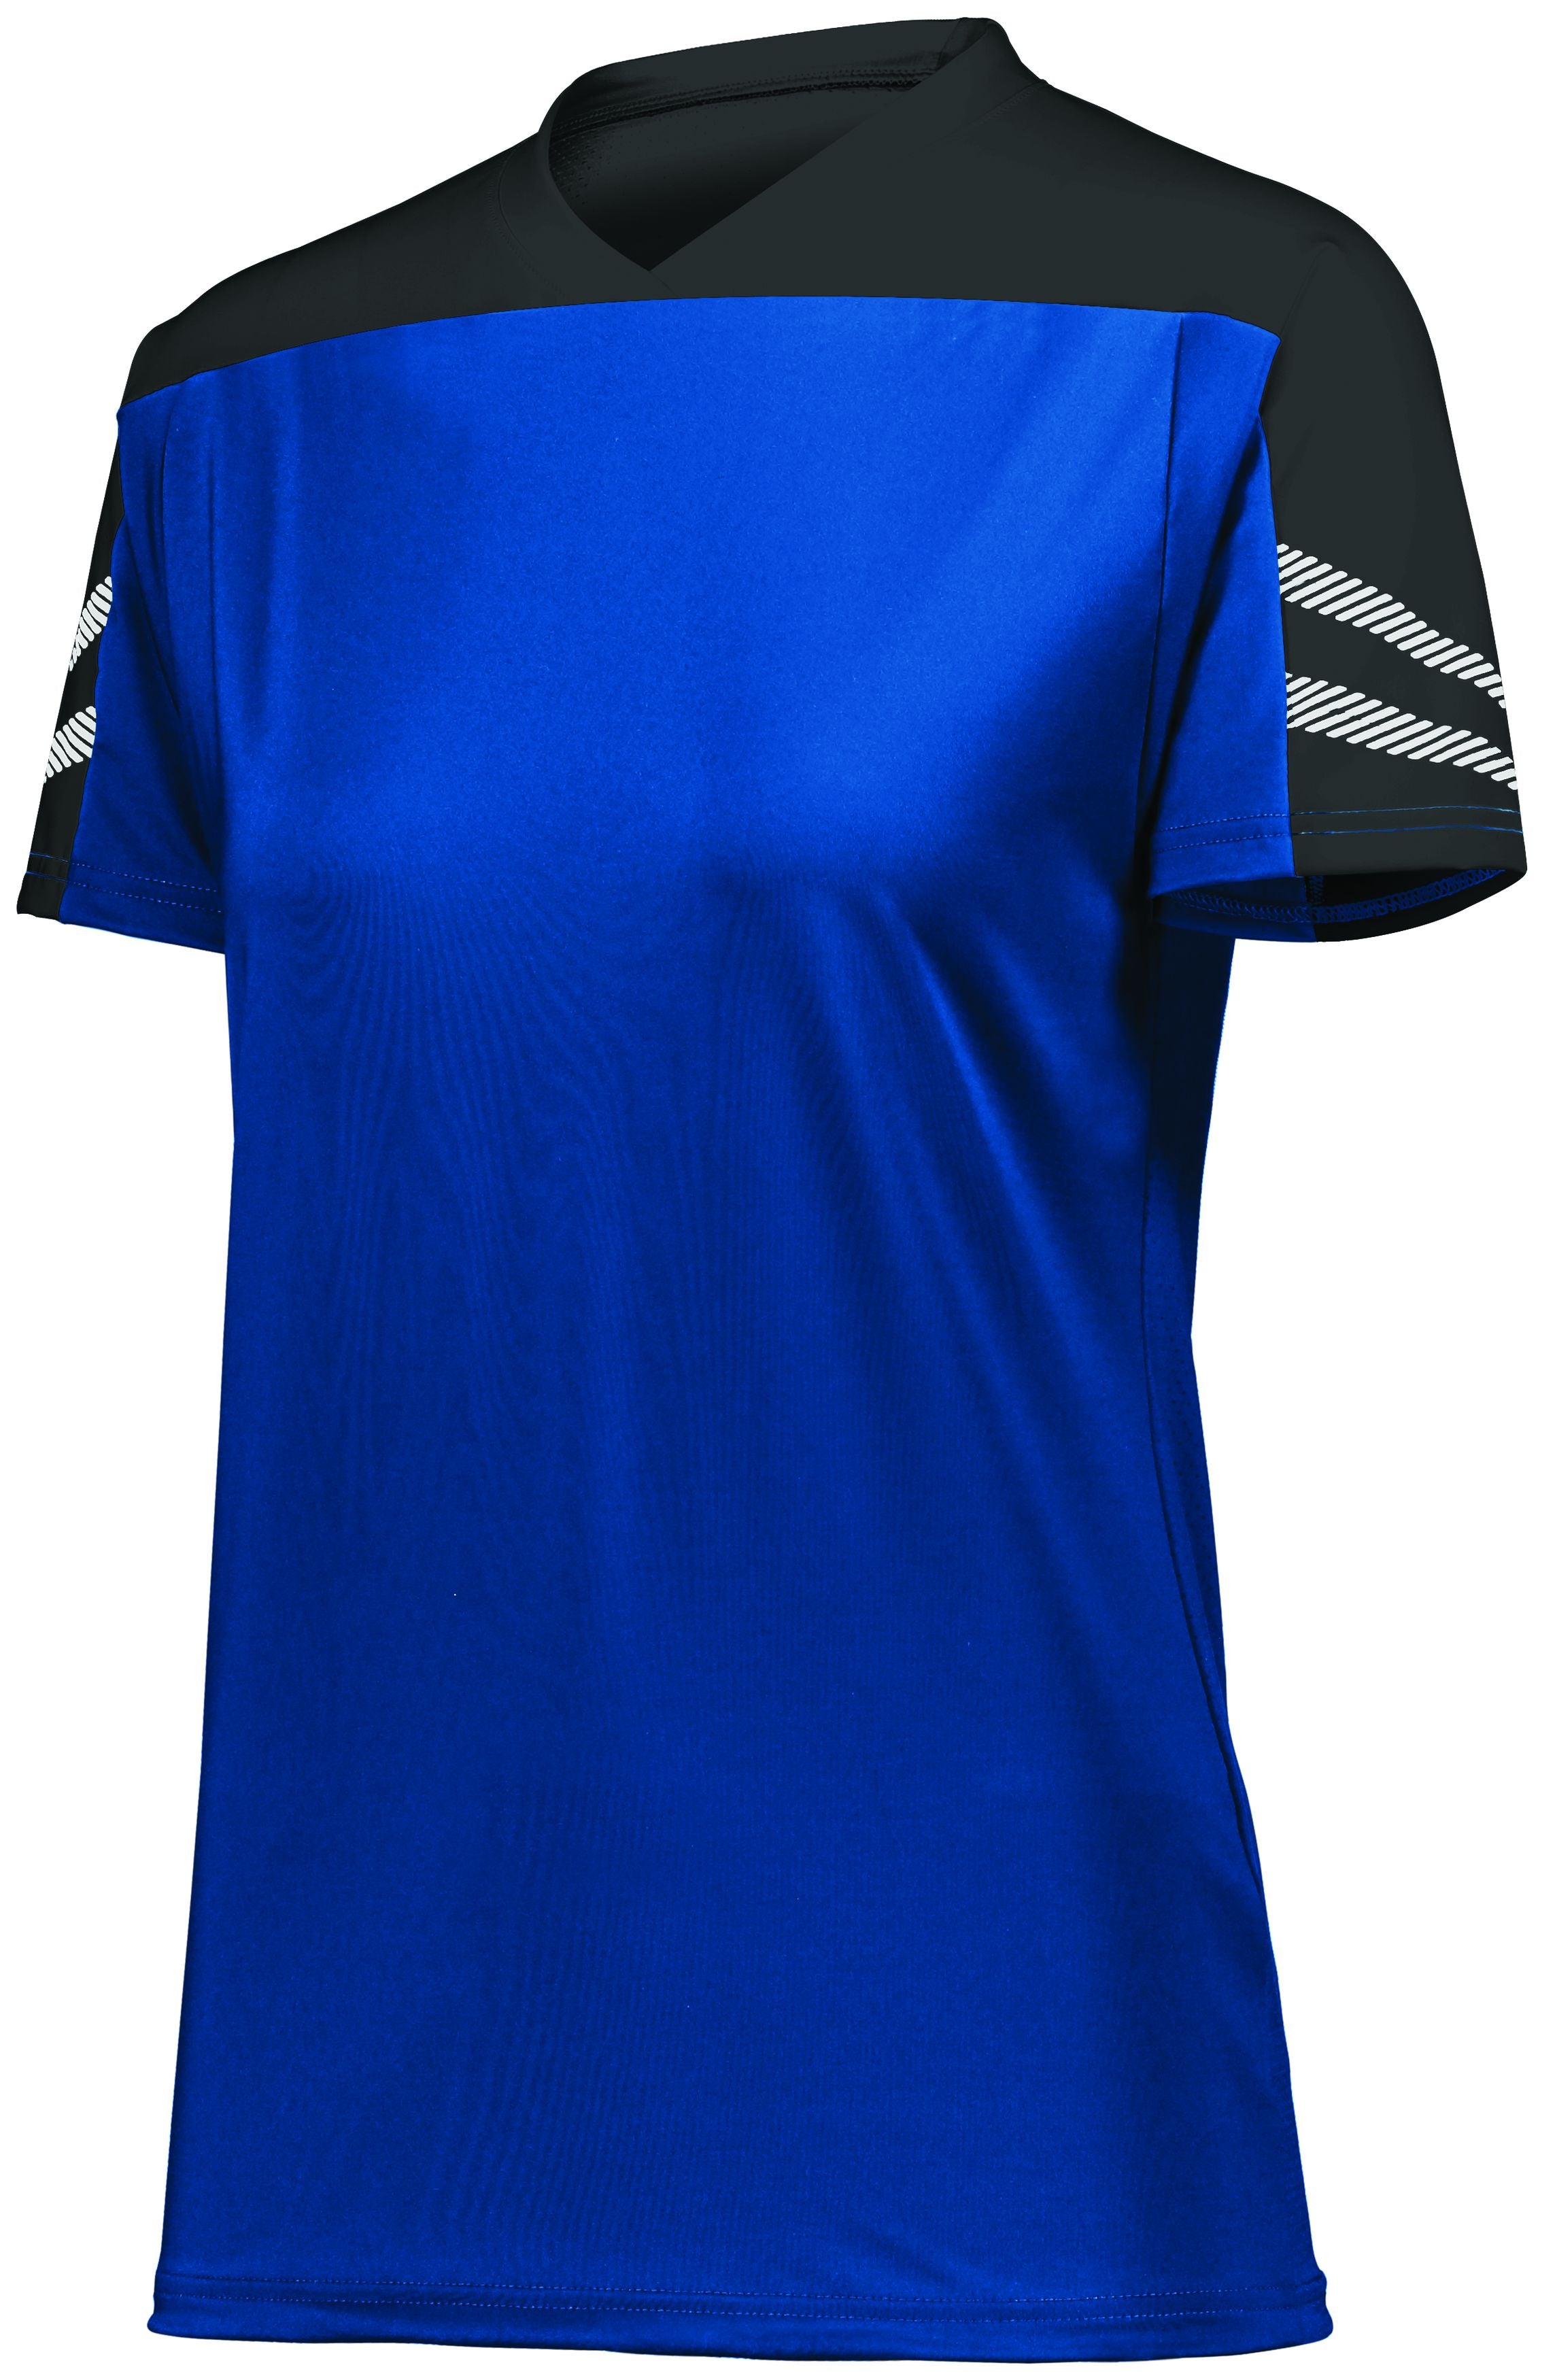 High 5 Ladies Anfield Soccer Jersey in Royal/Black/White  -Part of the Ladies, Ladies-Jersey, High5-Products, Soccer, Shirts, All-Sports-1 product lines at KanaleyCreations.com